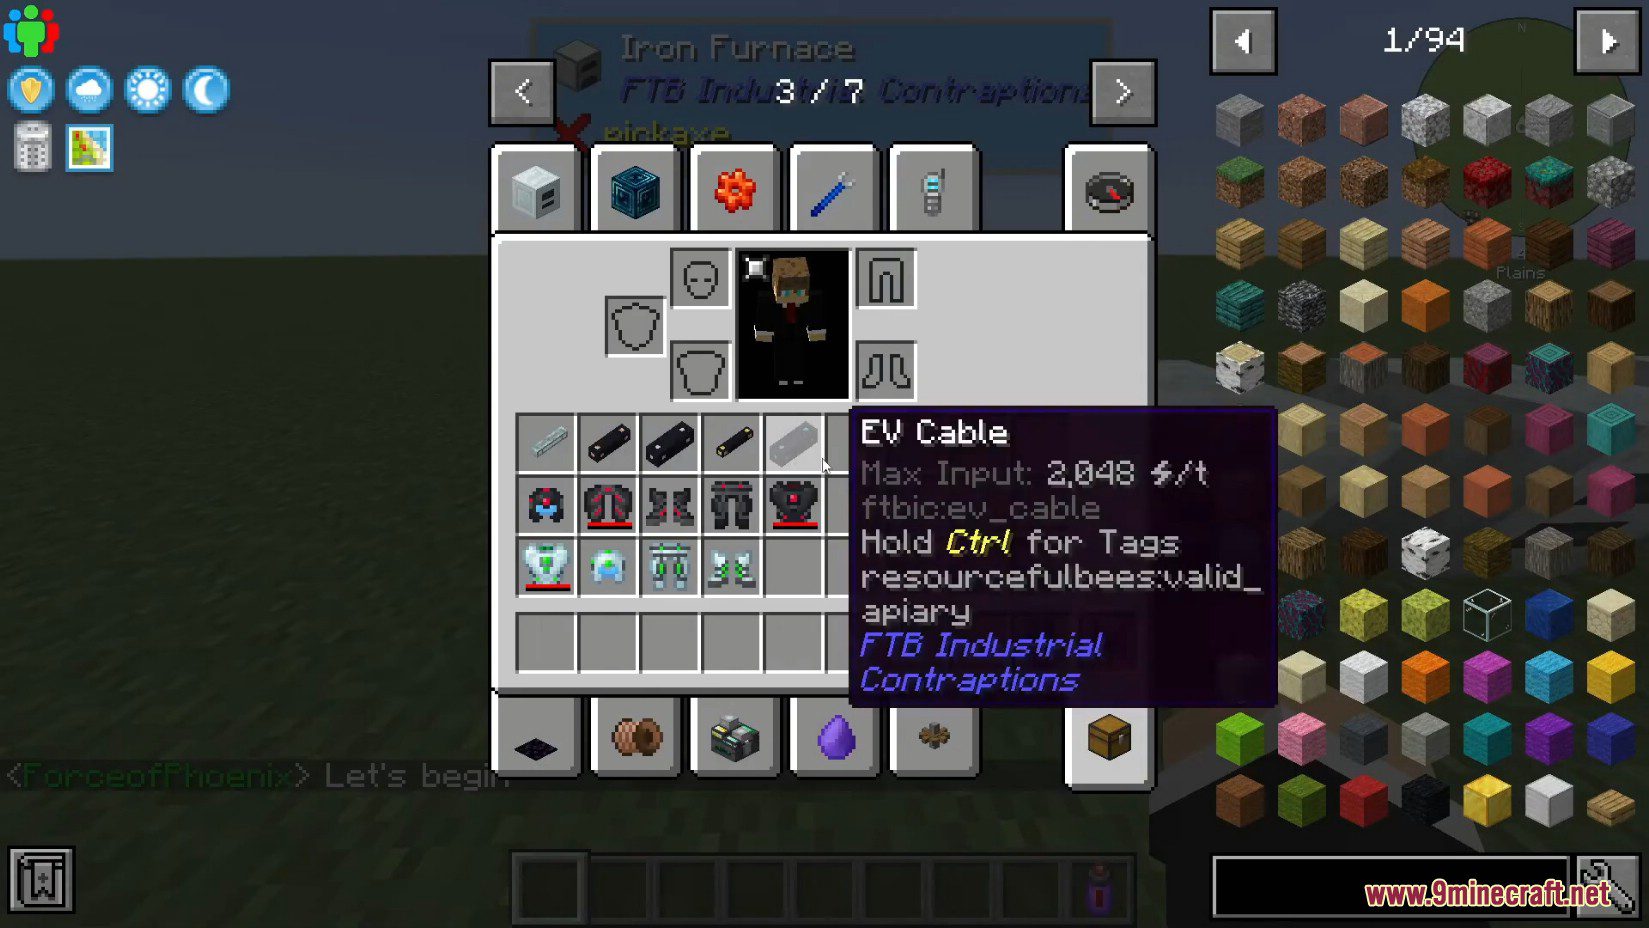 FTB Industrial Contraptions Mod (1.18.2, 1.16.5) - The Same Industrial Craft 2 2